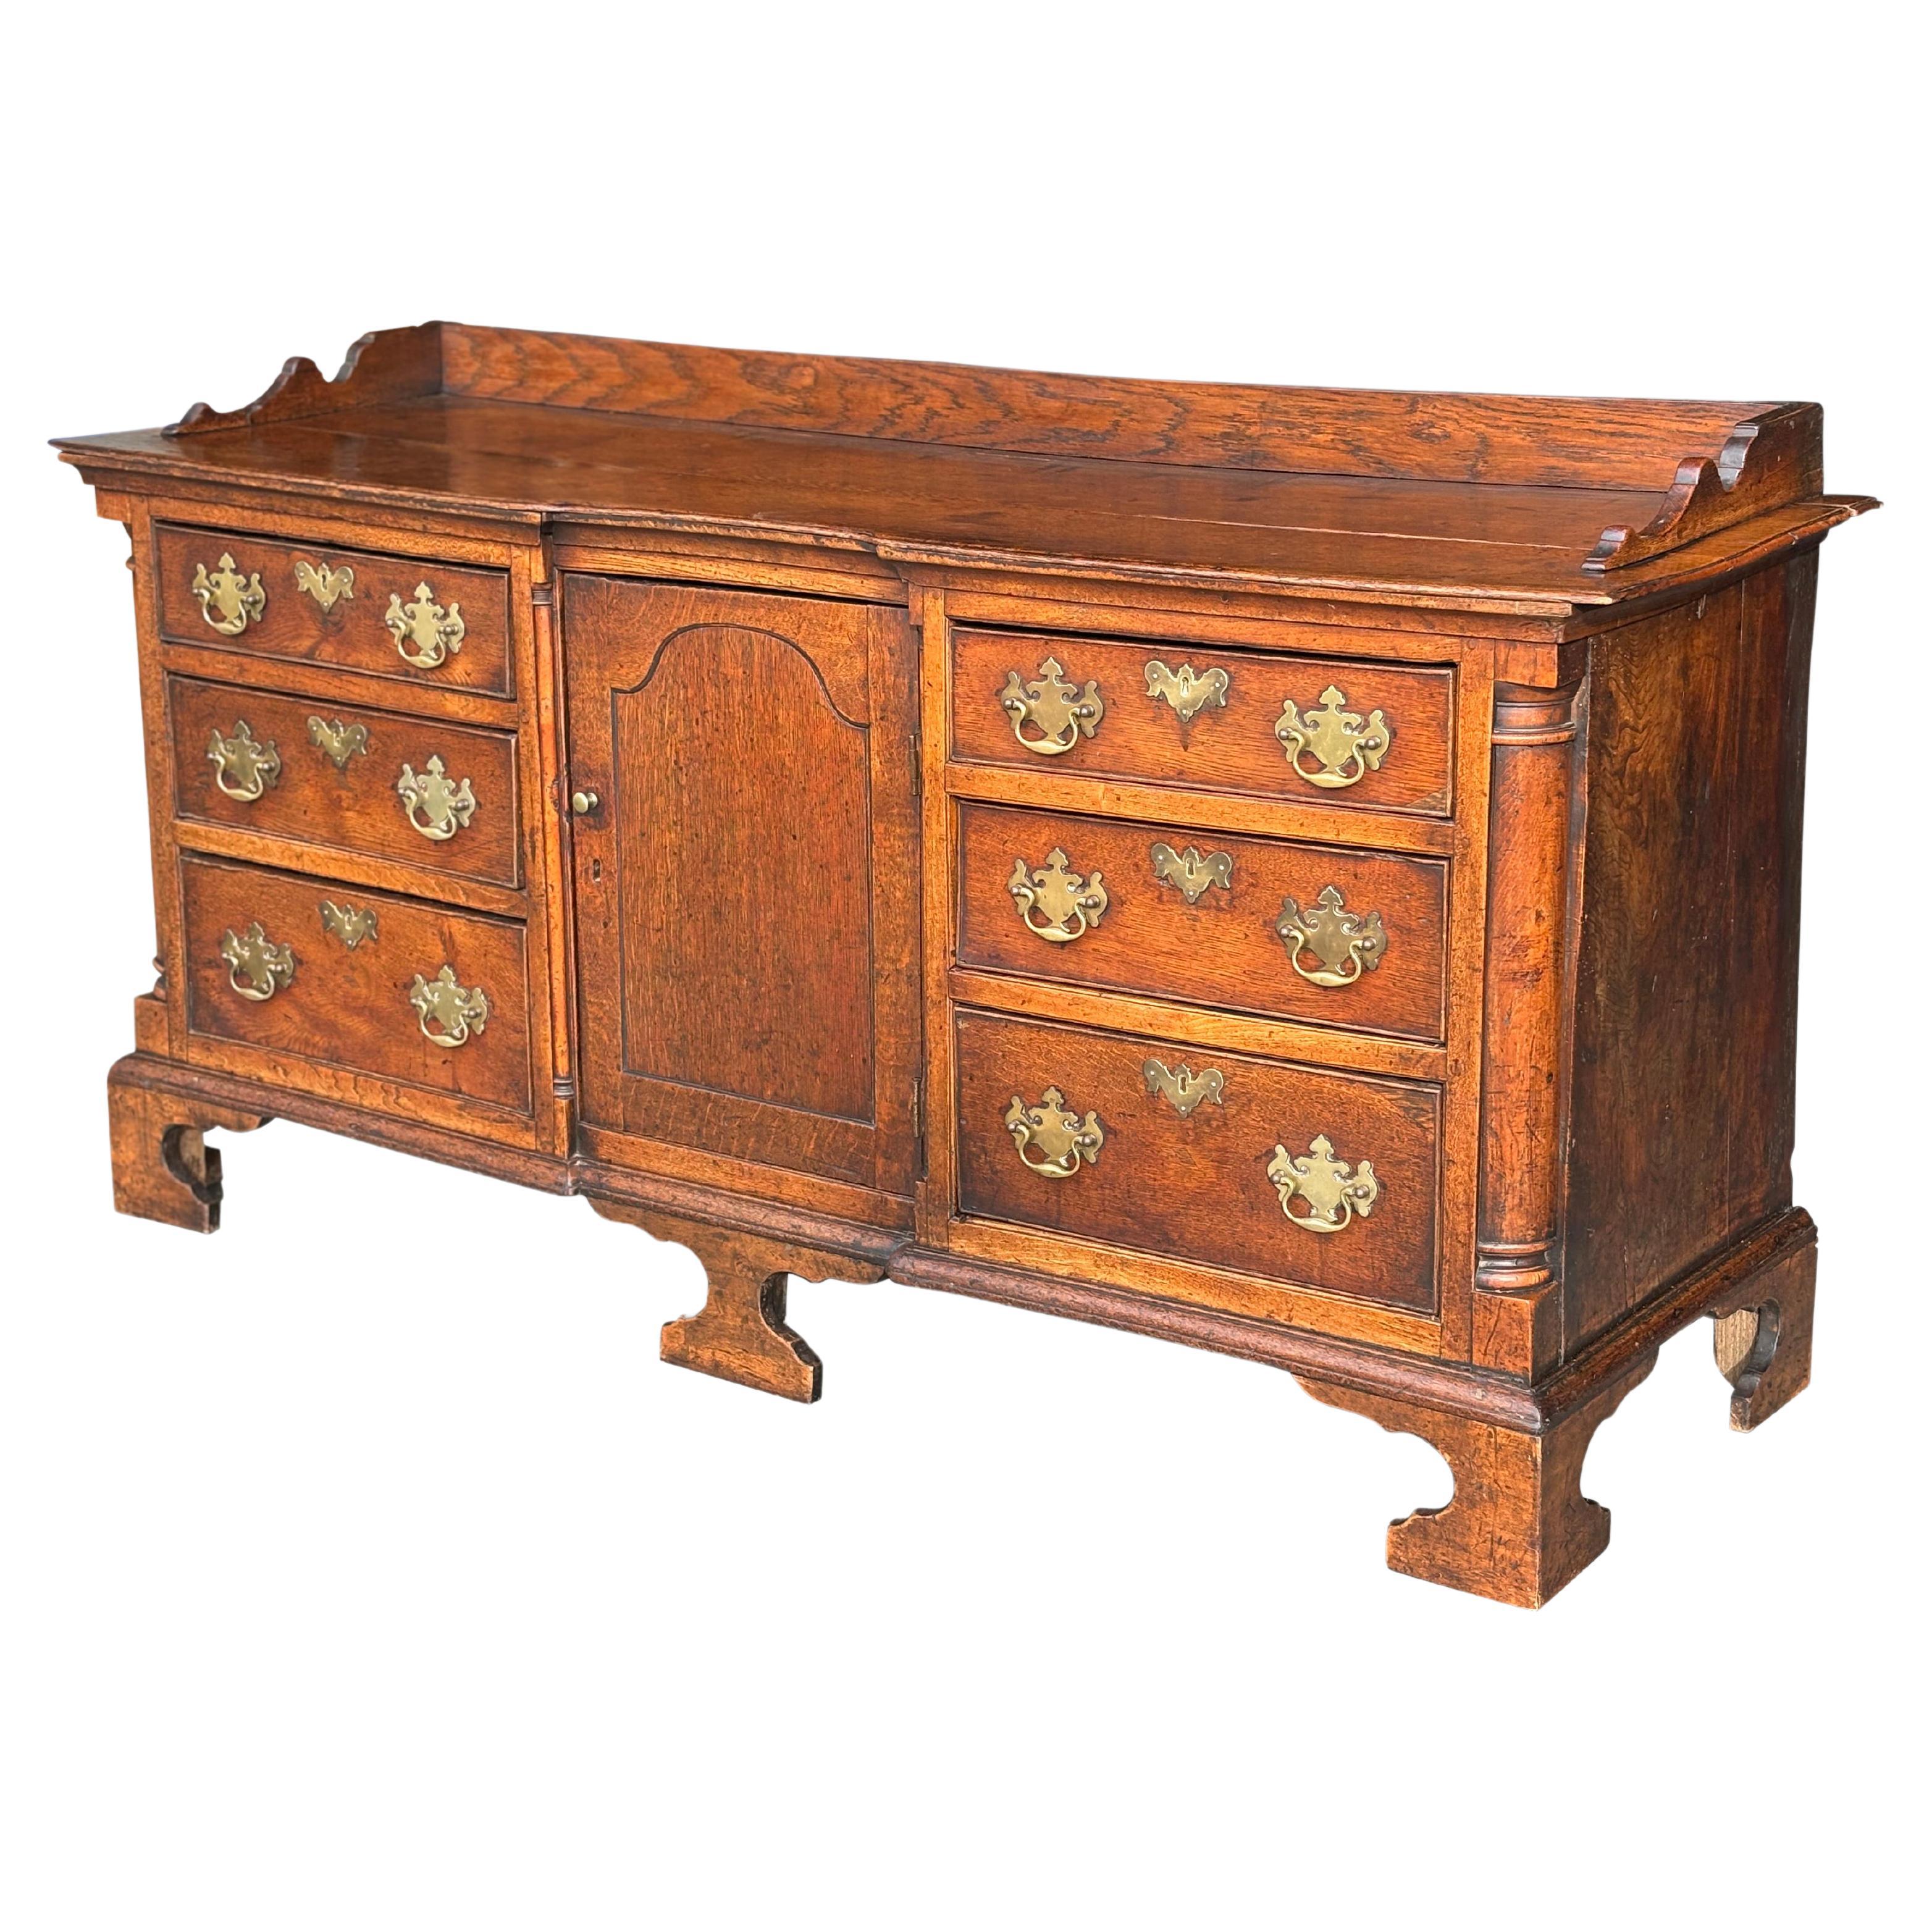 An 18th century Lancashire solid oak dresser base with fabulous colour and rich patina. Moulded rectangular planked top above a practical arrangement of a central cupboard flanked by 3 graduated drawers either side with brass plate handles and